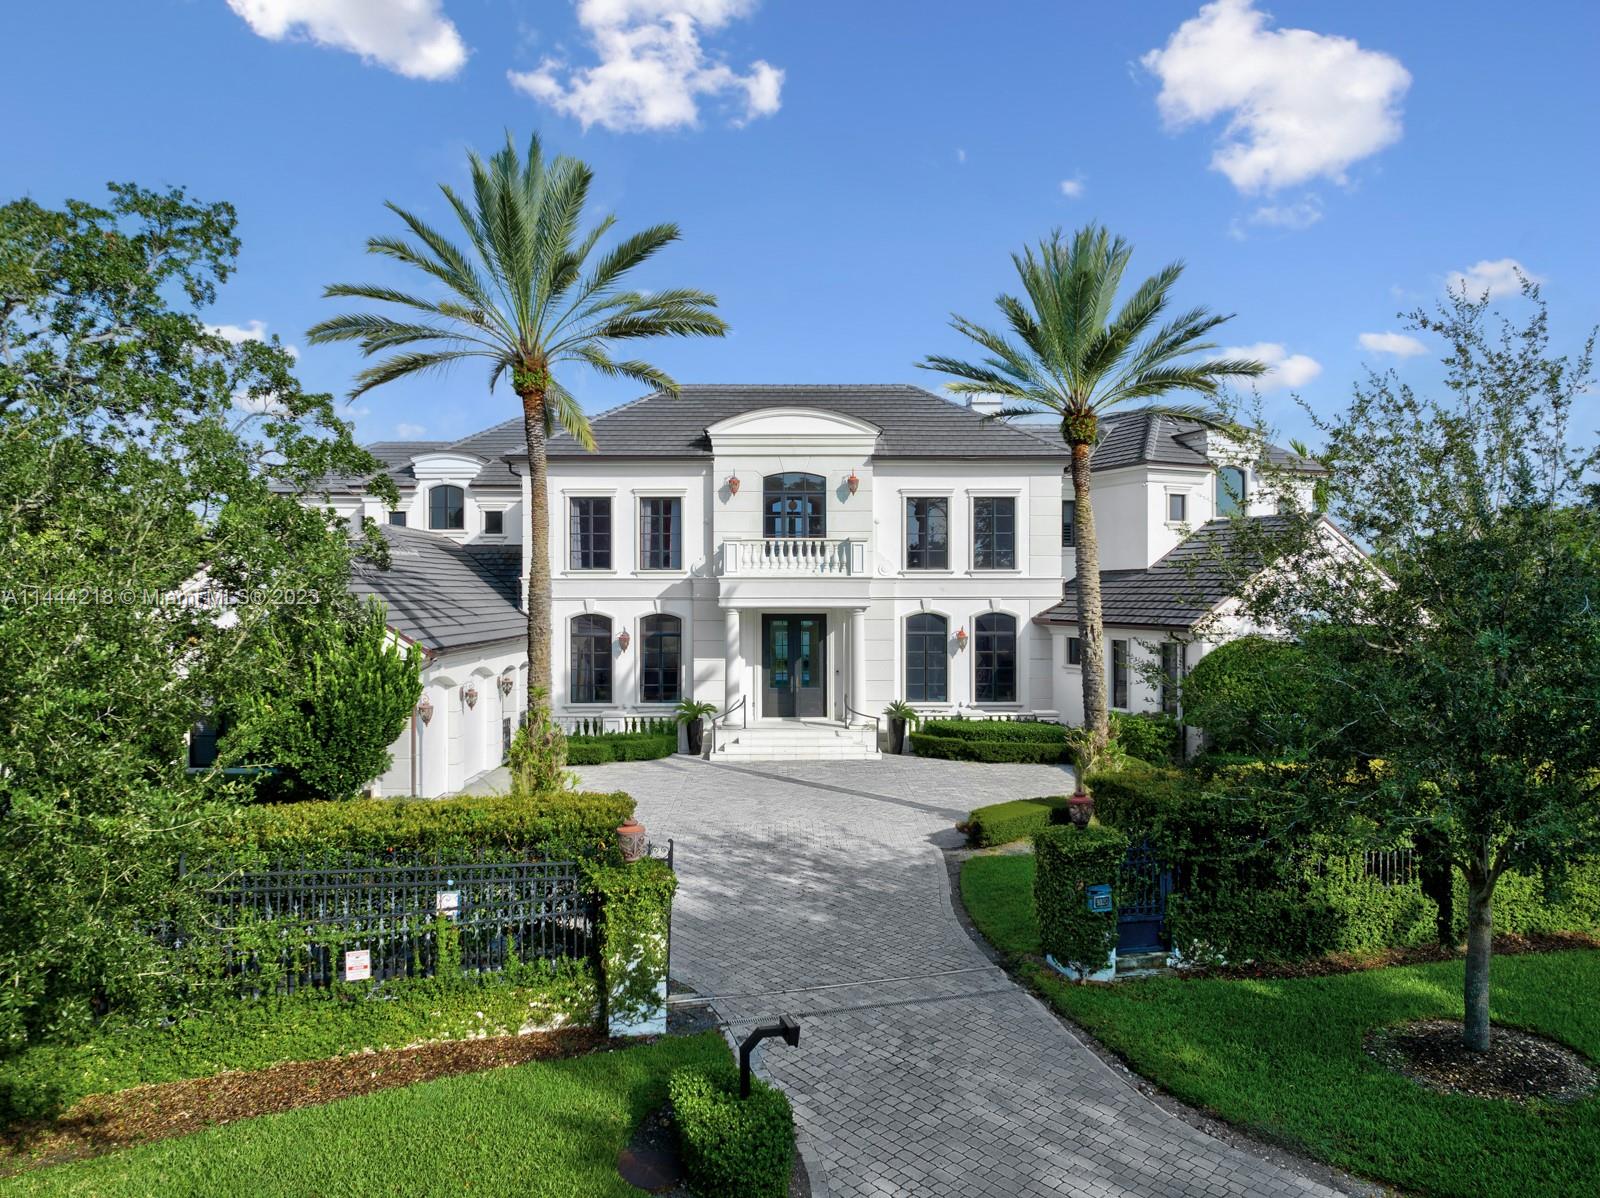 In the highly coveted &amp; gated Coral Gables community of Old Cutler Bay, this stunning residence was designed by famed architect Ramon Pacheco &amp; remodeled in 2015 offering modern luxury living. This architectural marvel showcases a grand foyer with a sweeping staircase &amp; soaring ceilings that welcomes an abundance of natural light and elegance. The focal point of this magnificent estate, however, is the 100&#039; private dock, providing direct ocean access. Features include custom finishes, full house generator, in-home theater, 2 guest suites, staff quarters, and a 4-car garage. Complete with an infinity-edge pool, plenty of covered terraces, and beautiful water views.